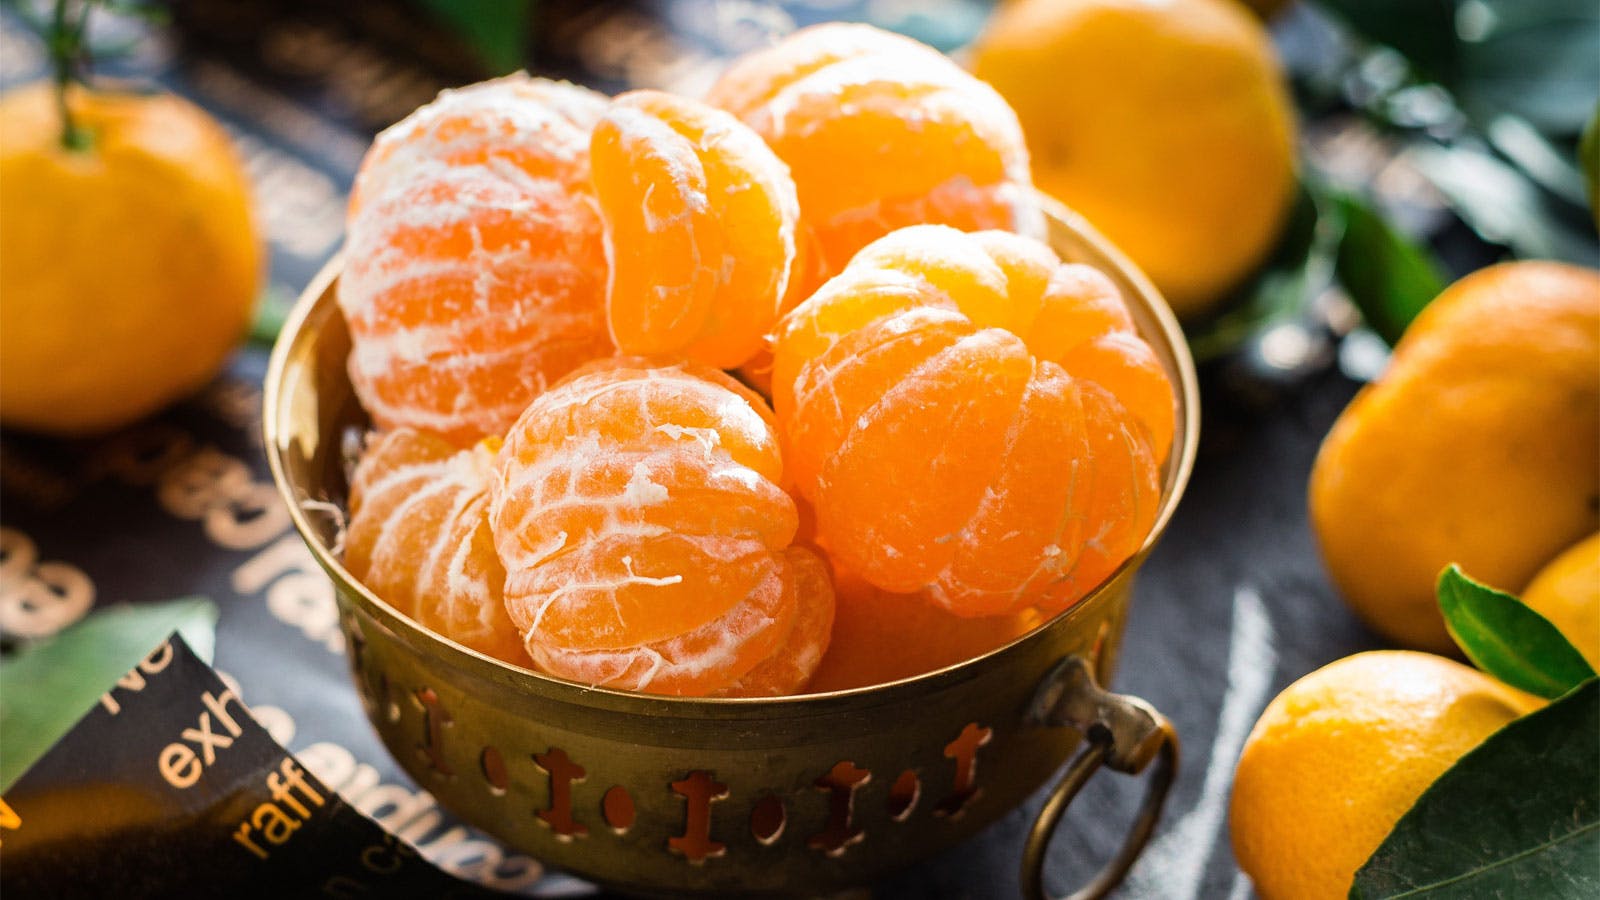 The famous mandarins of Chios